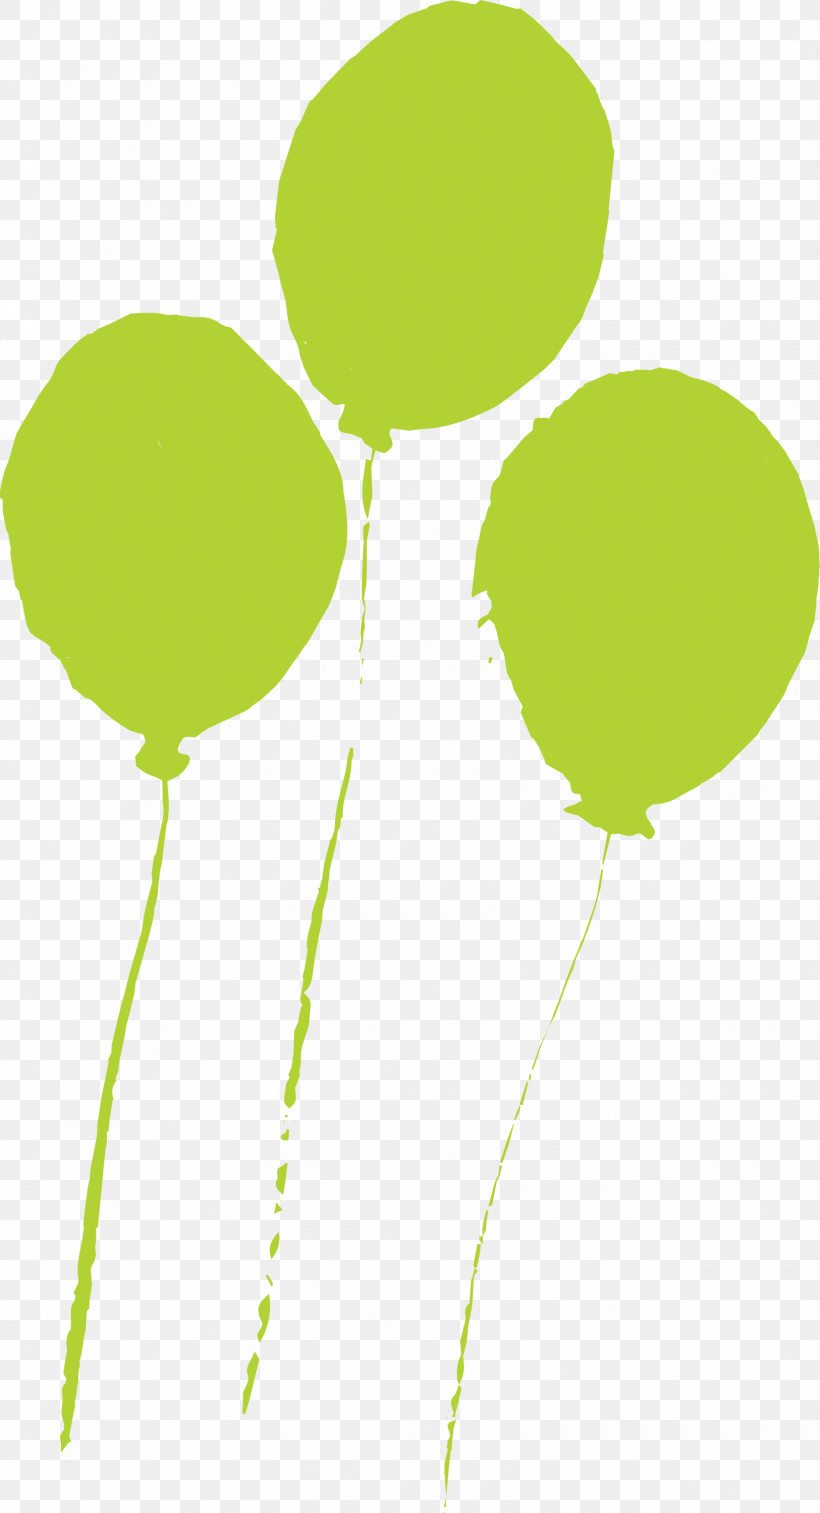 Green Leaf Balloon Plant Plant Stem, PNG, 1625x3000px, Watercolor Balloon, Balloon, Green, Leaf, Party Supply Download Free